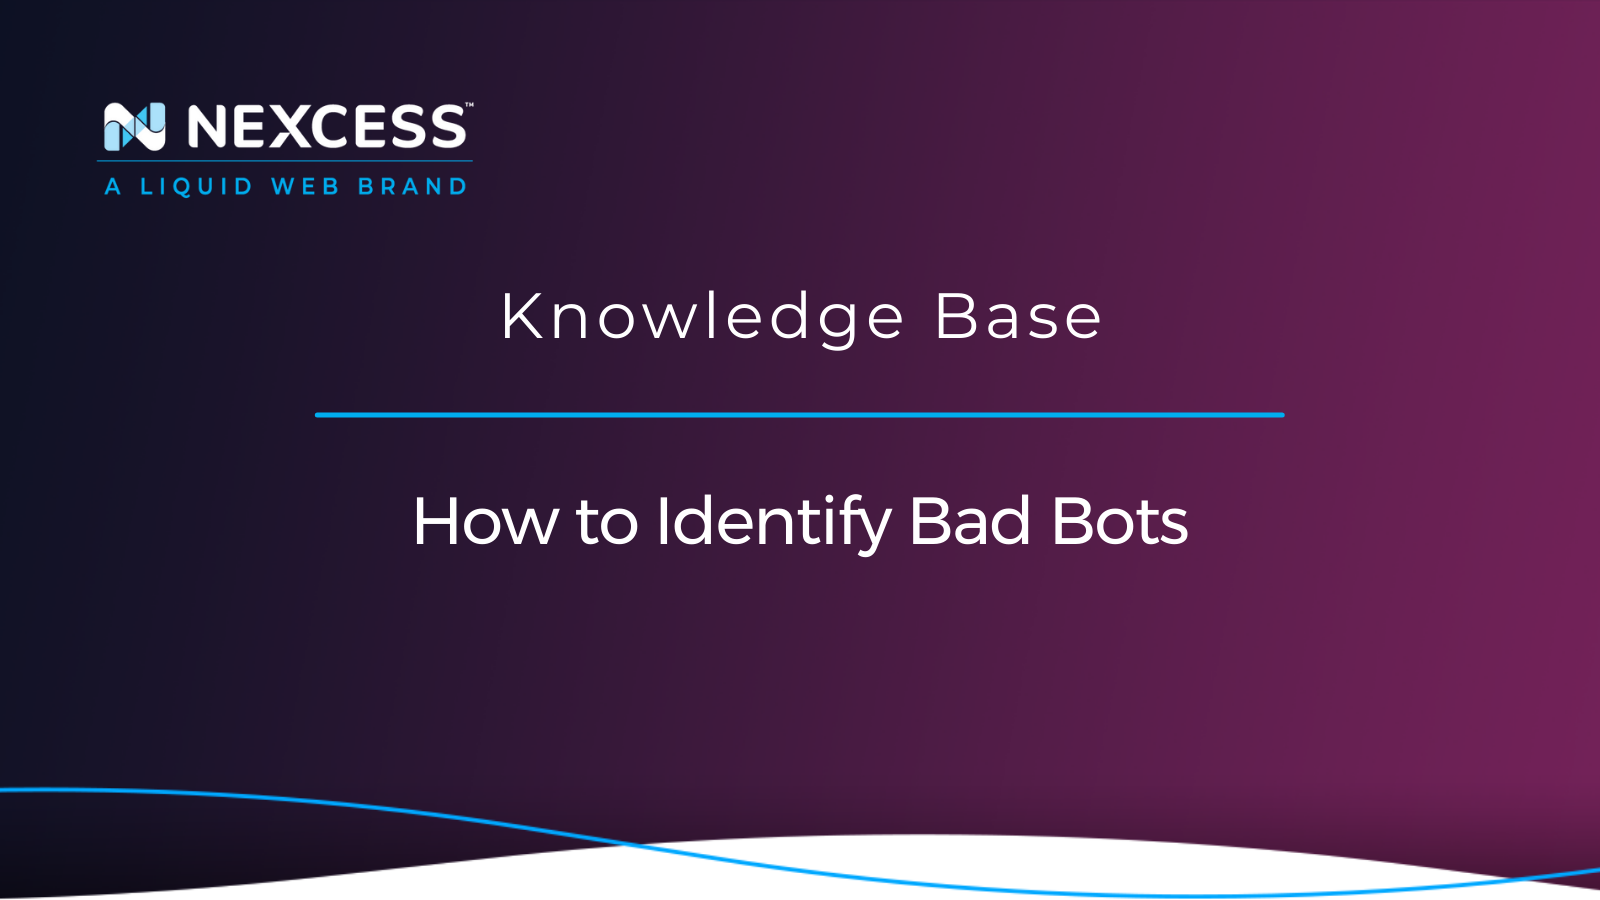 How to Identify Bad Bots